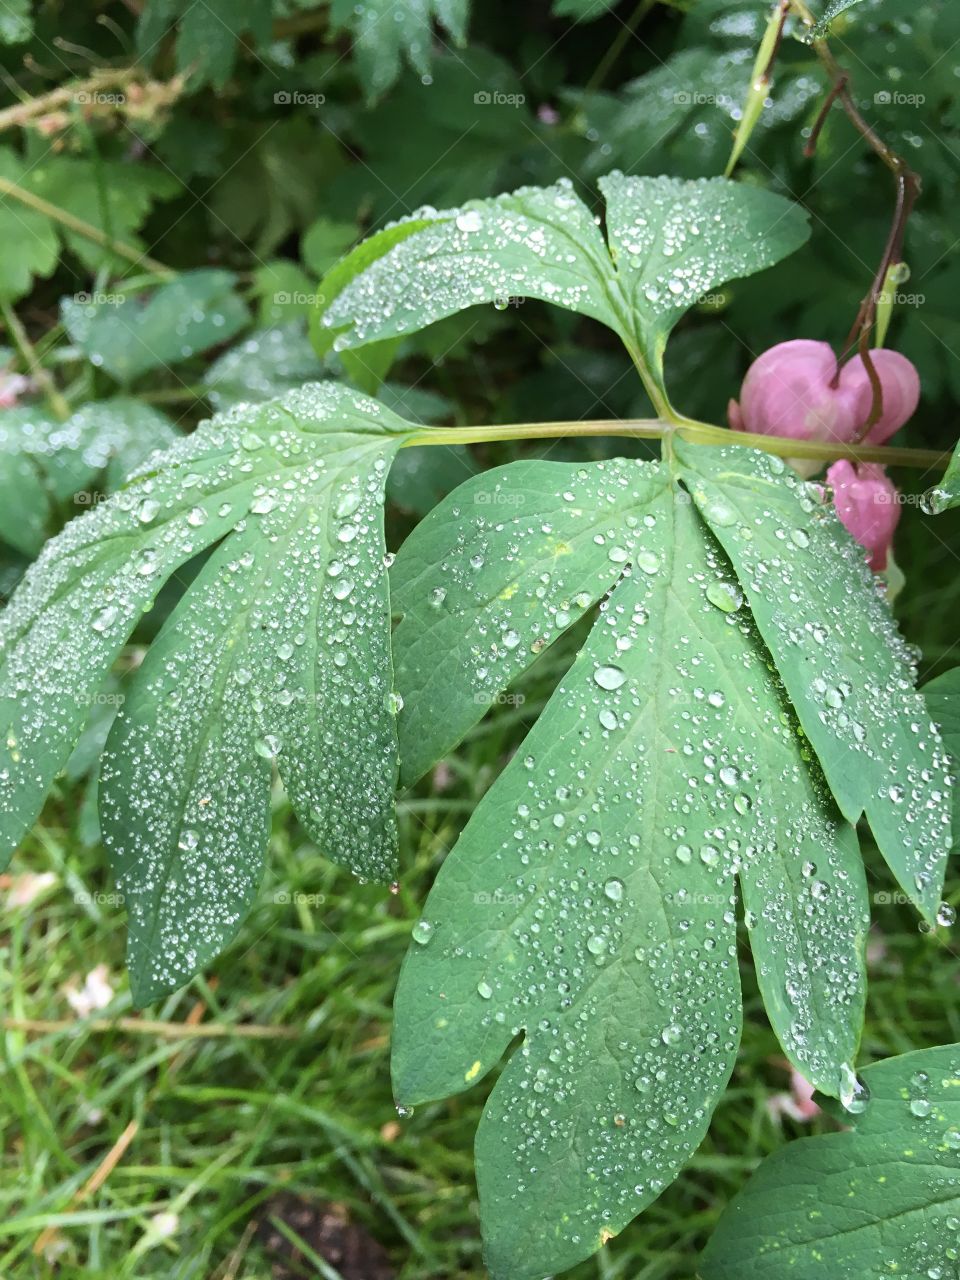 Dicentra plant leaf covered in dew drops after a damp summer night in the garden 